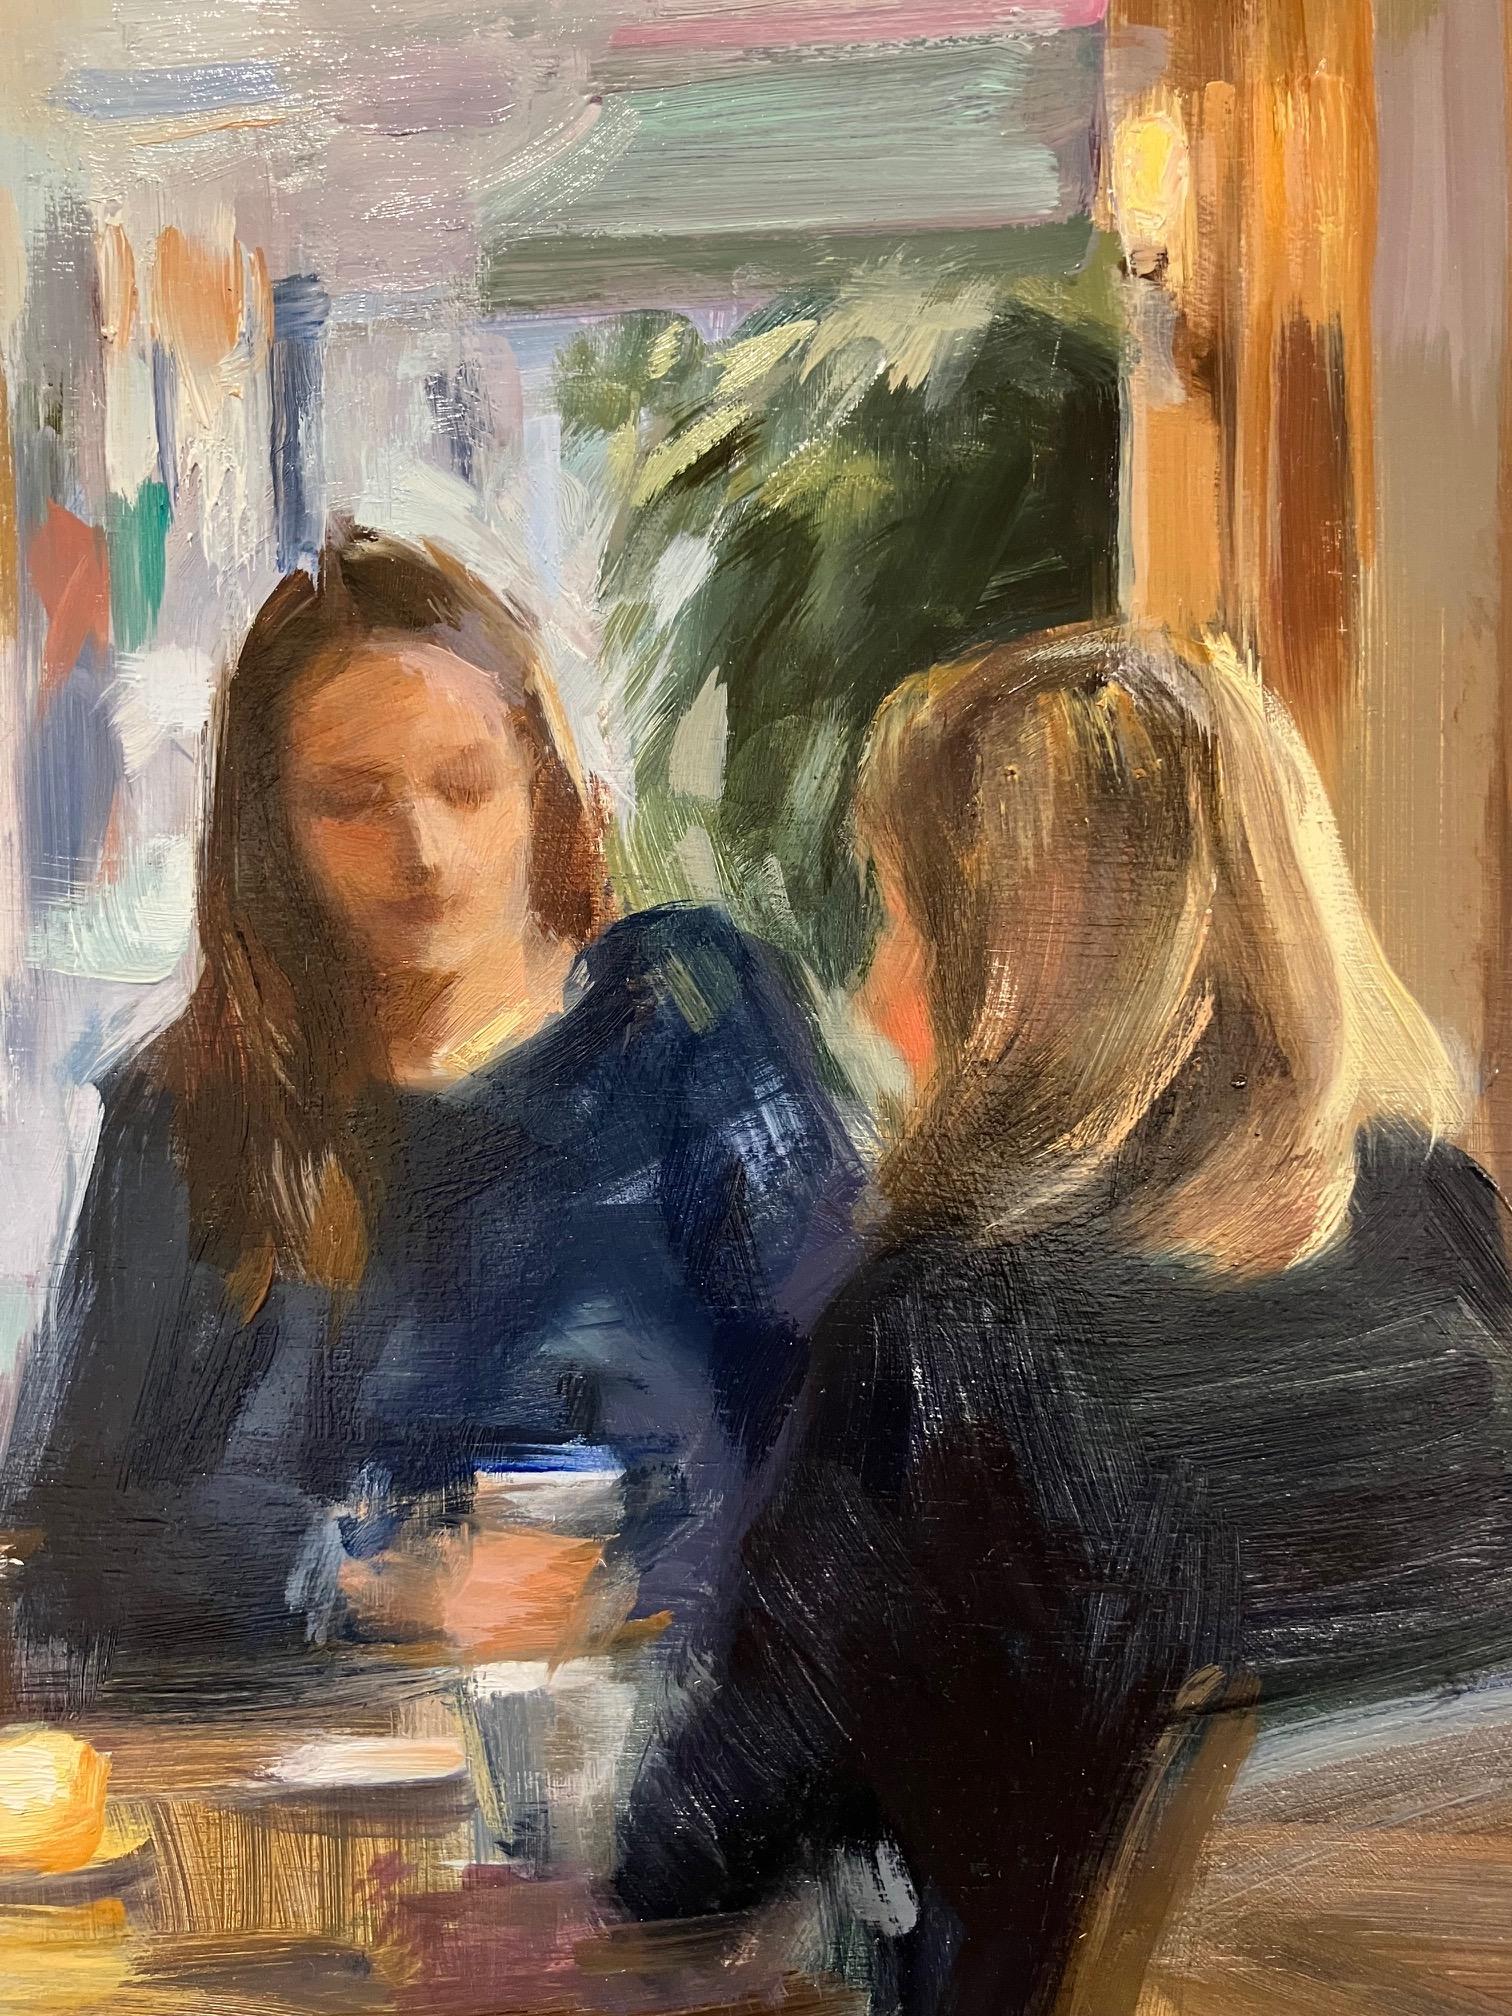 The Spanish artist Mònica Castanys is inspired by everyday scenes. Moments, femininity and light are the basis of her paintings. Her color palette is reminiscent of the Impressionist, but with an expressive touch and her gaze is mainly focused on